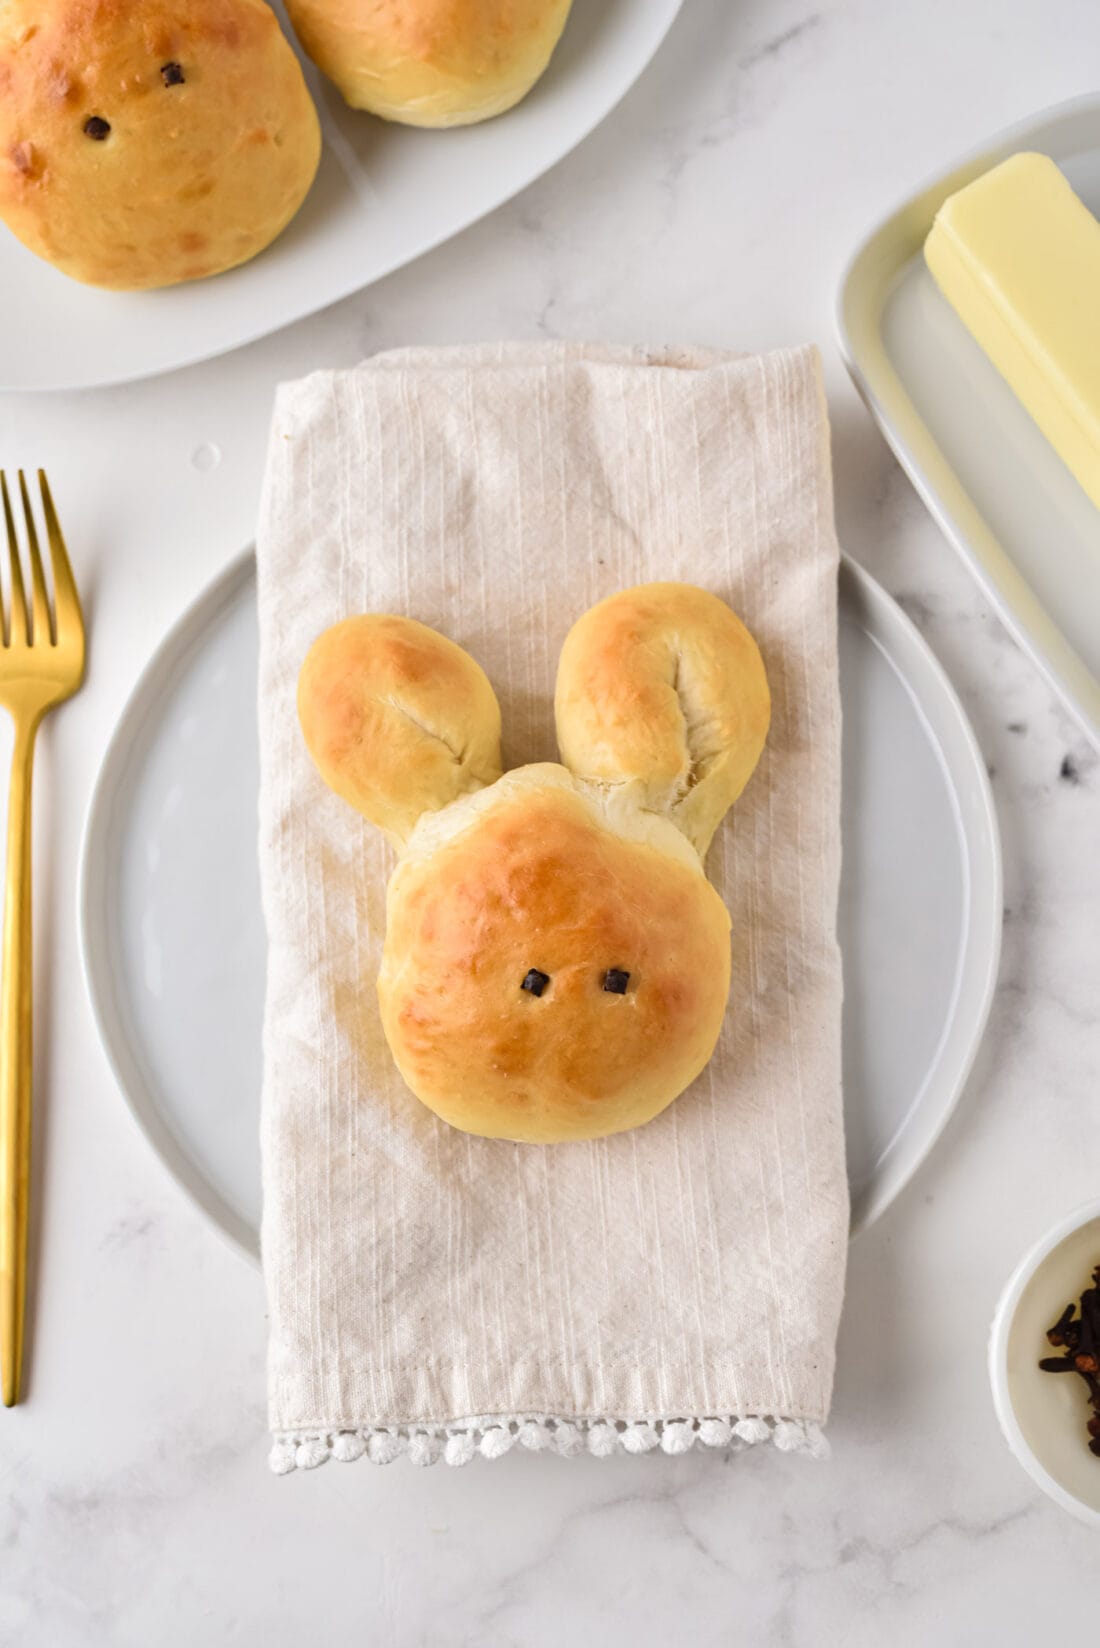 Bunny Roll on a napkin as a place setting